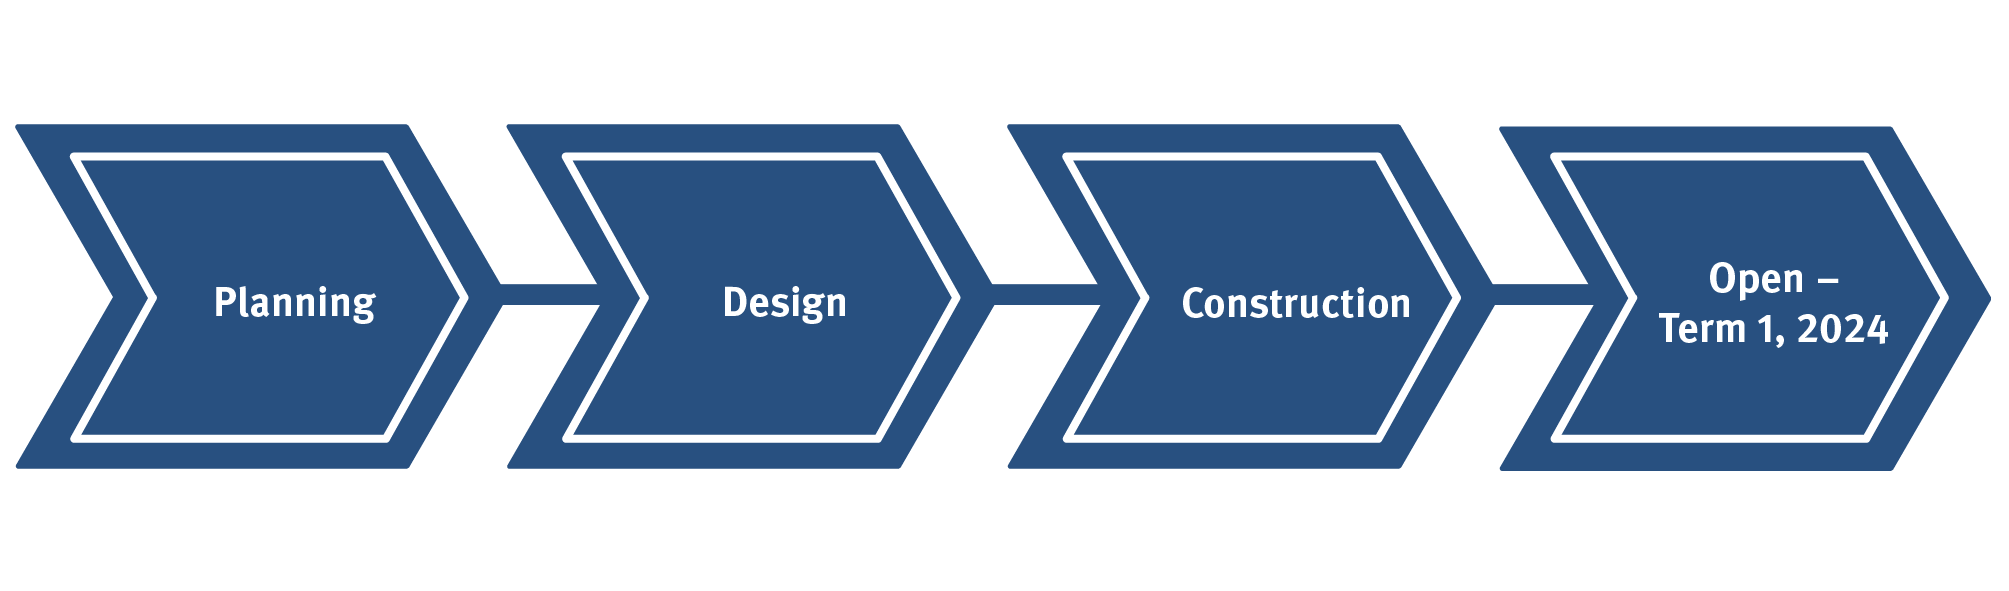 Banner which shows the text 'planning' and 'design' and 'construction' with a dark blue background  and 'Open Term 1 2024' with a grey background.